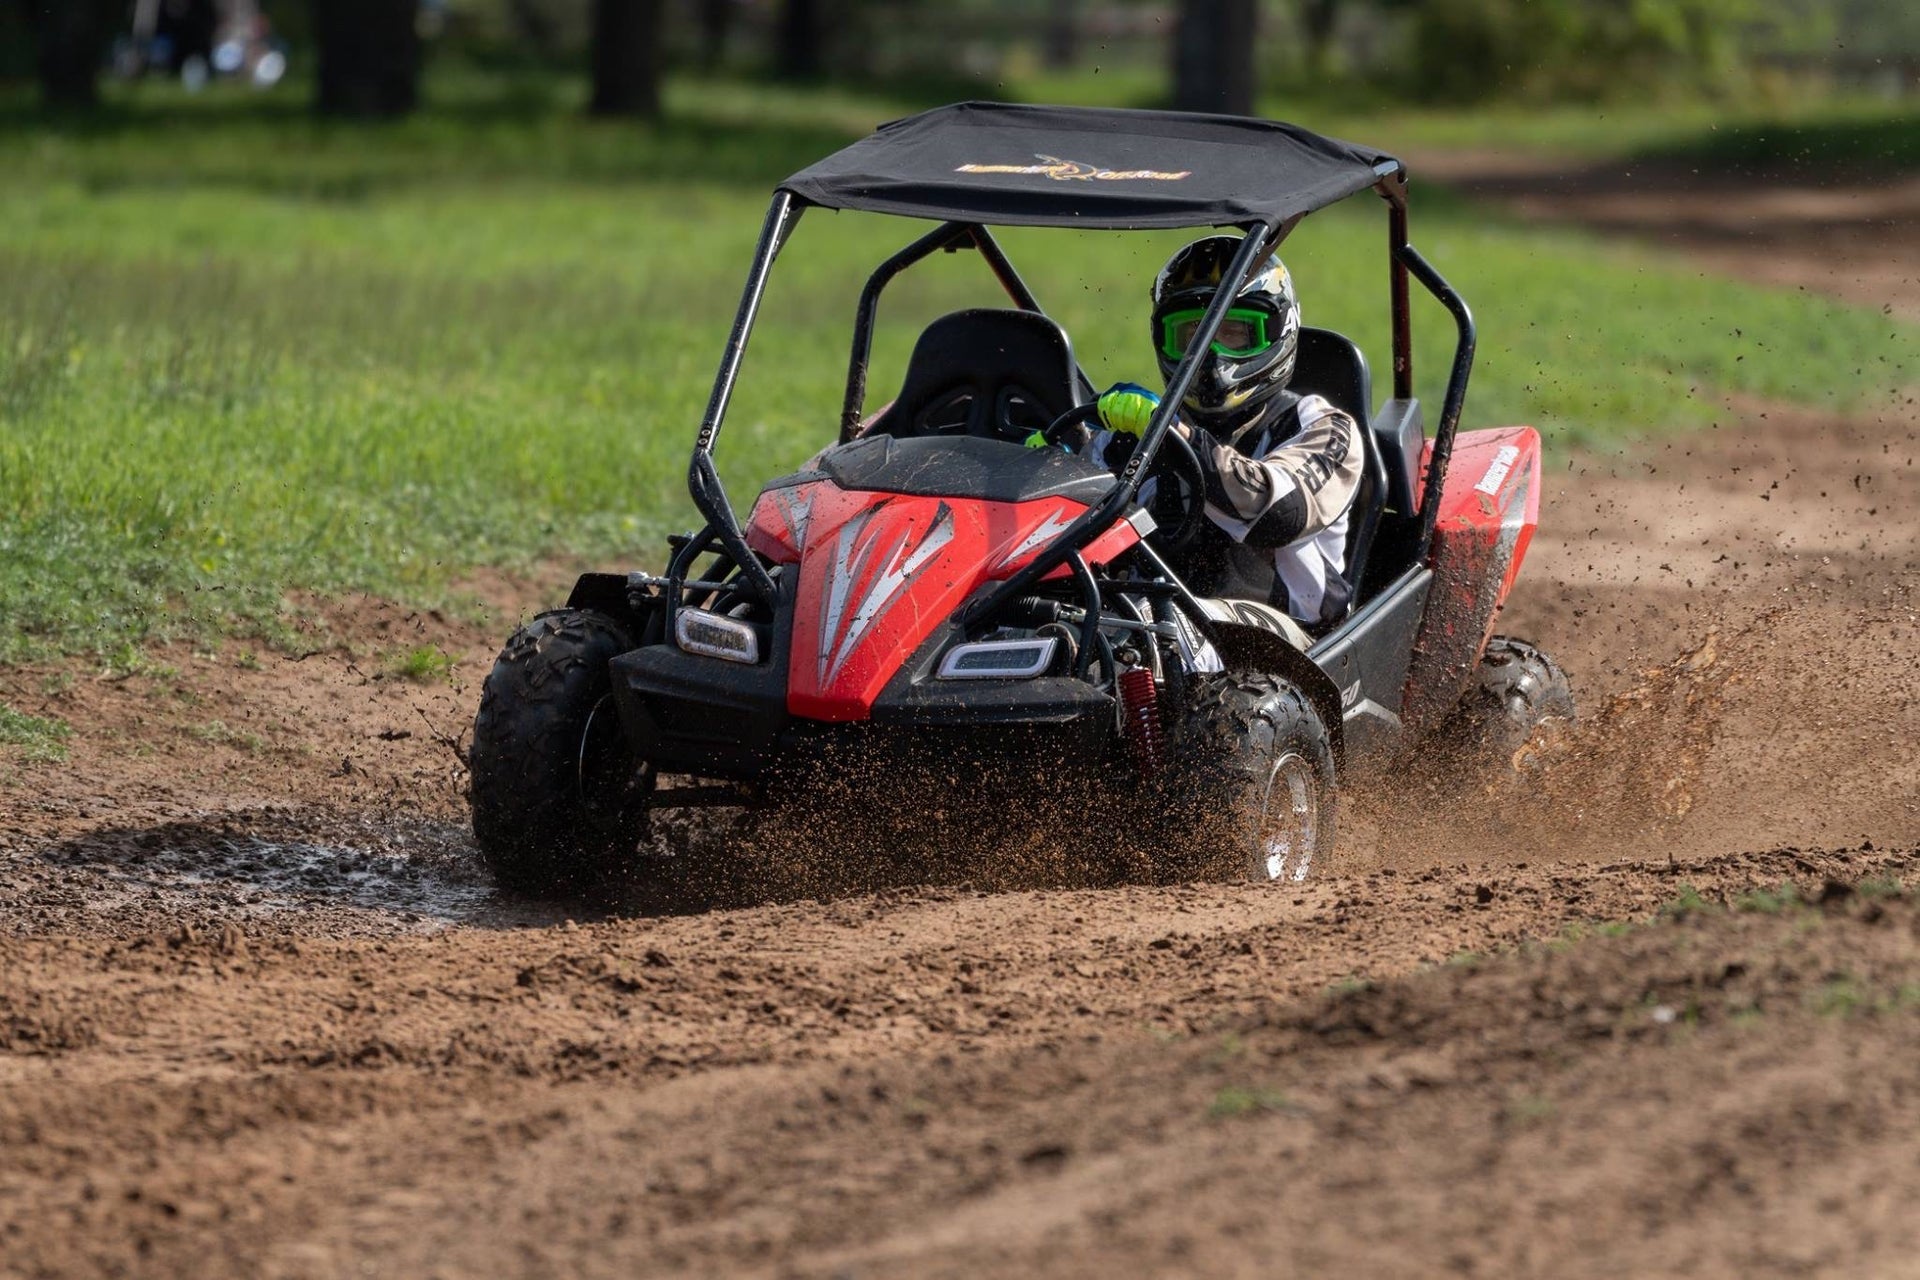 hammerhead-gts150-le-off-road-buggy-driving-on-a-dirt-track